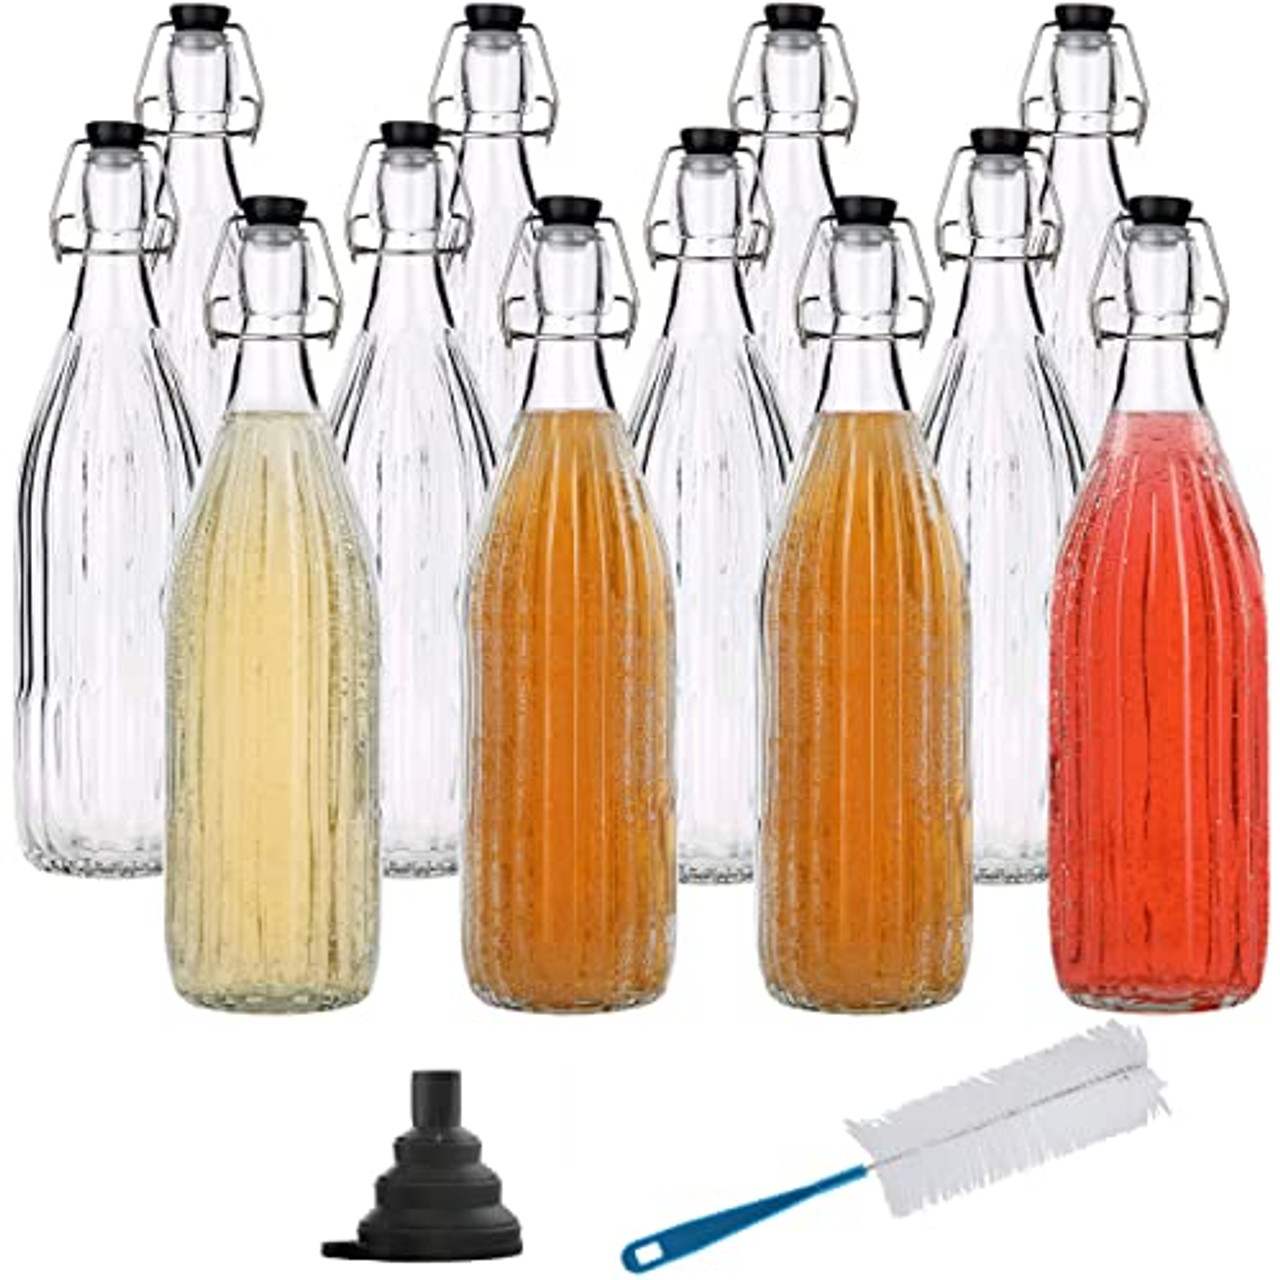 Glass Bottles with Swing Top Lids, Clear Glass Bottles for Home Brewing,  Kombucha, Beer, and Other Liquor,16 Ounce, 12 Pack by Chef's Star